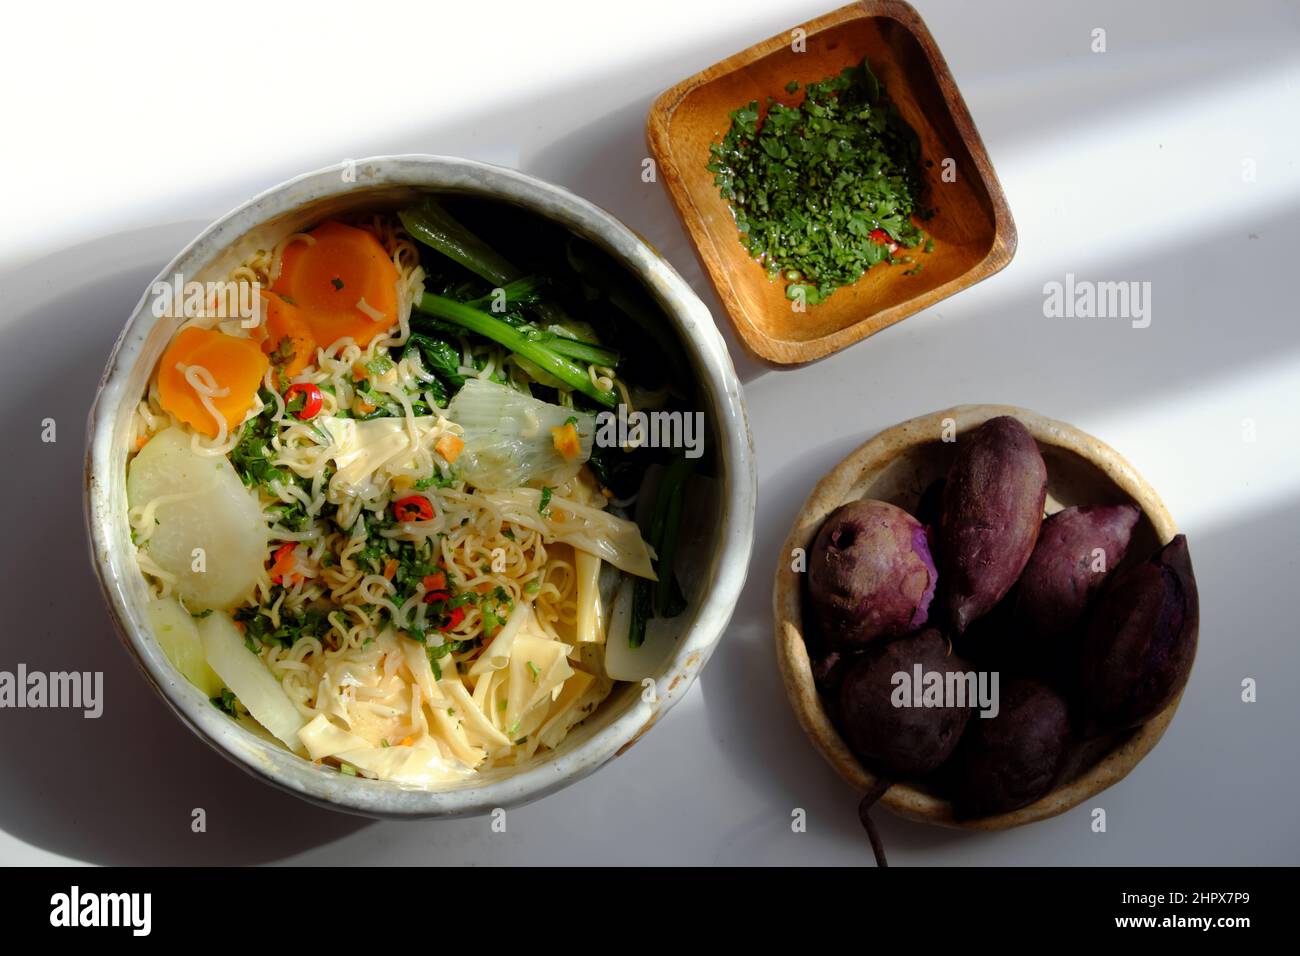 Vietnamese vegan meal for quick breakfast, instant noodle cook with mustard leaf, carrot, turnip, tofu skin, bowl of noodles soup on white background Stock Photo